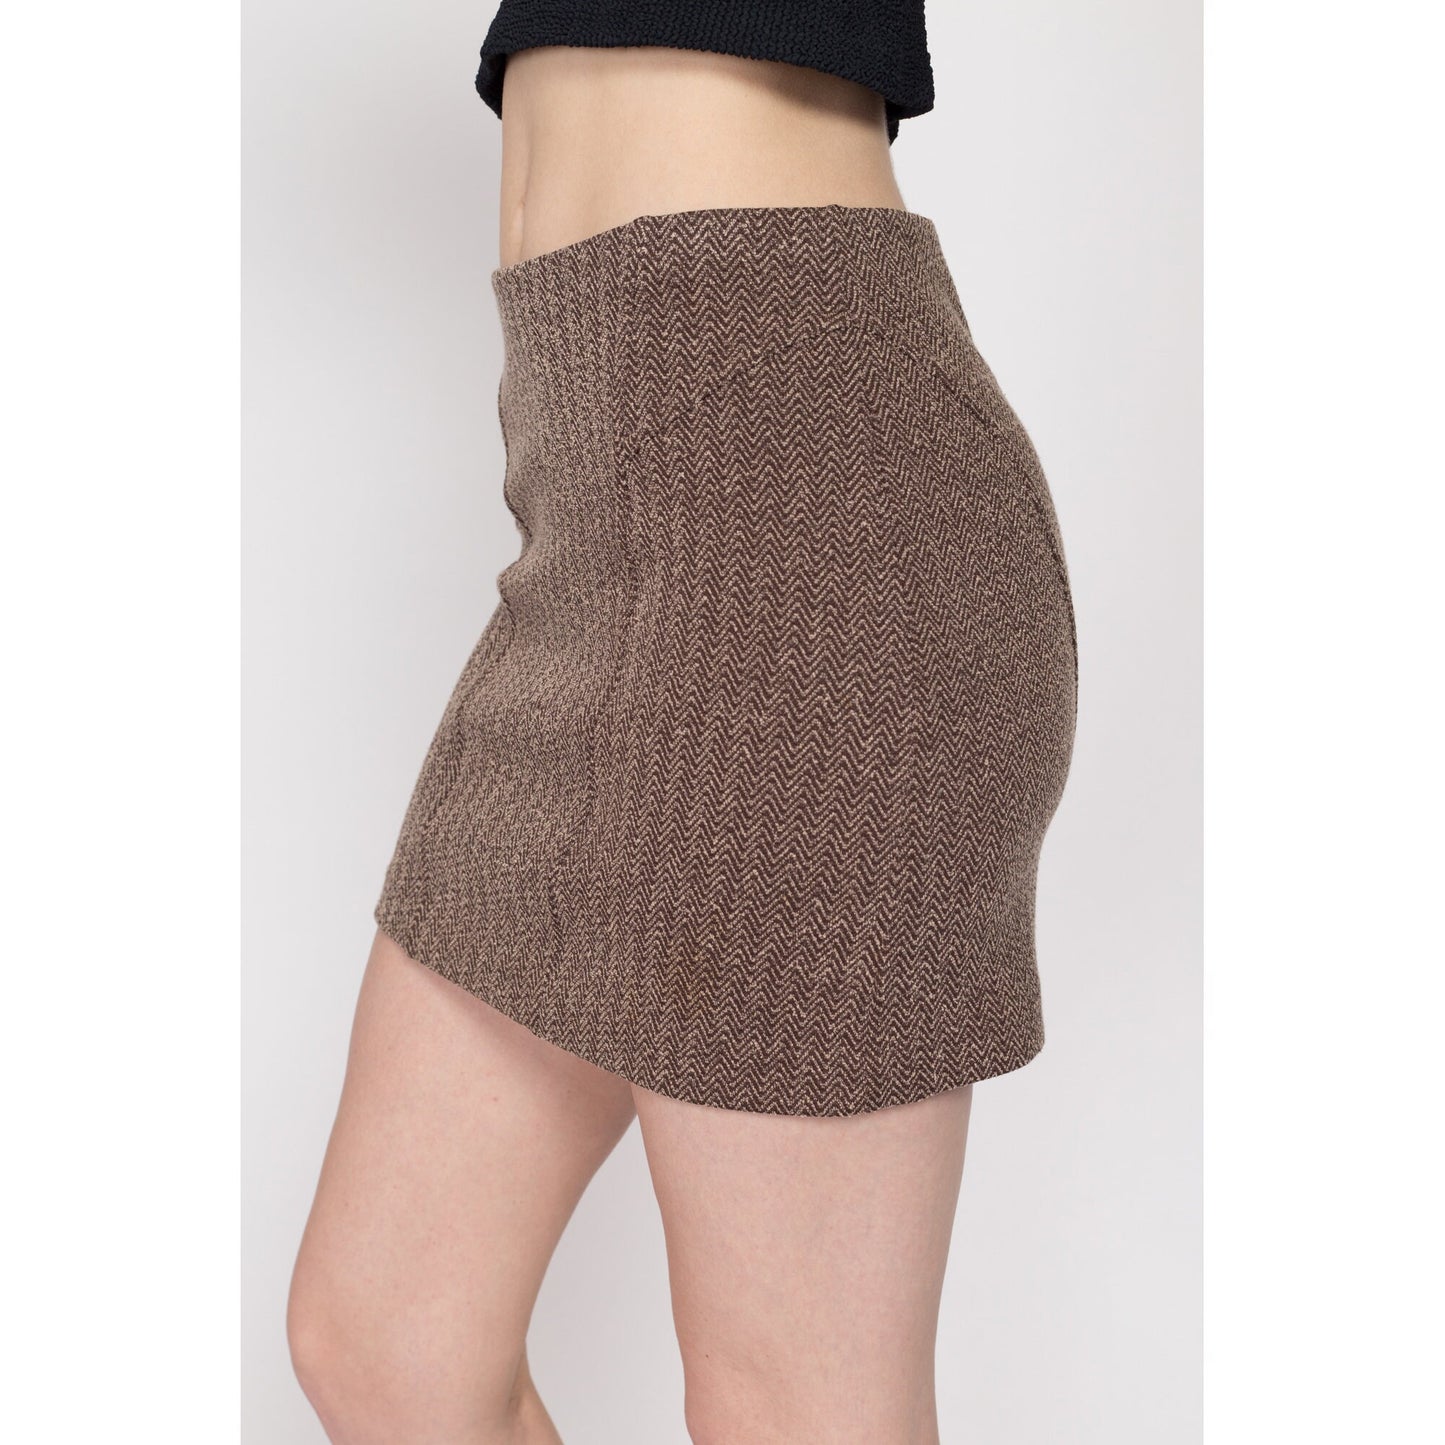 XS-Sm 90s Brown Herringbone Knit Mini Skirt | Vintage Express Stretchy Woven High Waisted Fitted Miniskirt